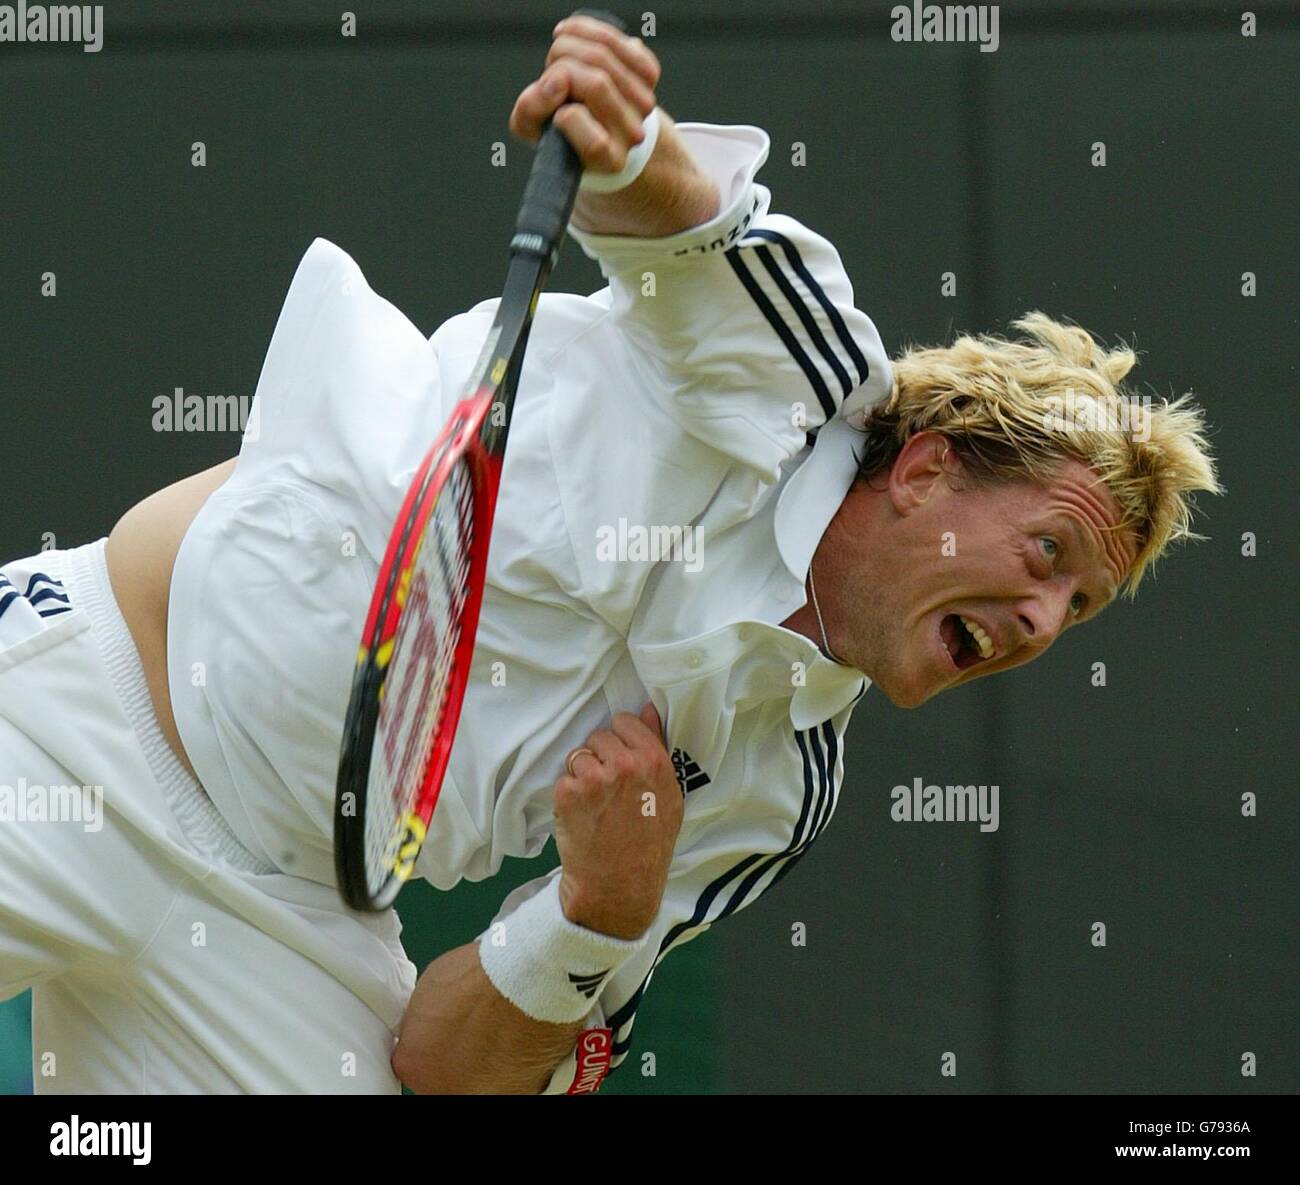 , NO MOBILE PHONE USE. Jonas Bjorkman from Sweden in action against Andy Roddick from the USA during their quarter-final match at the All England Lawn Tennis Championships at Wimbledon. Stock Photo